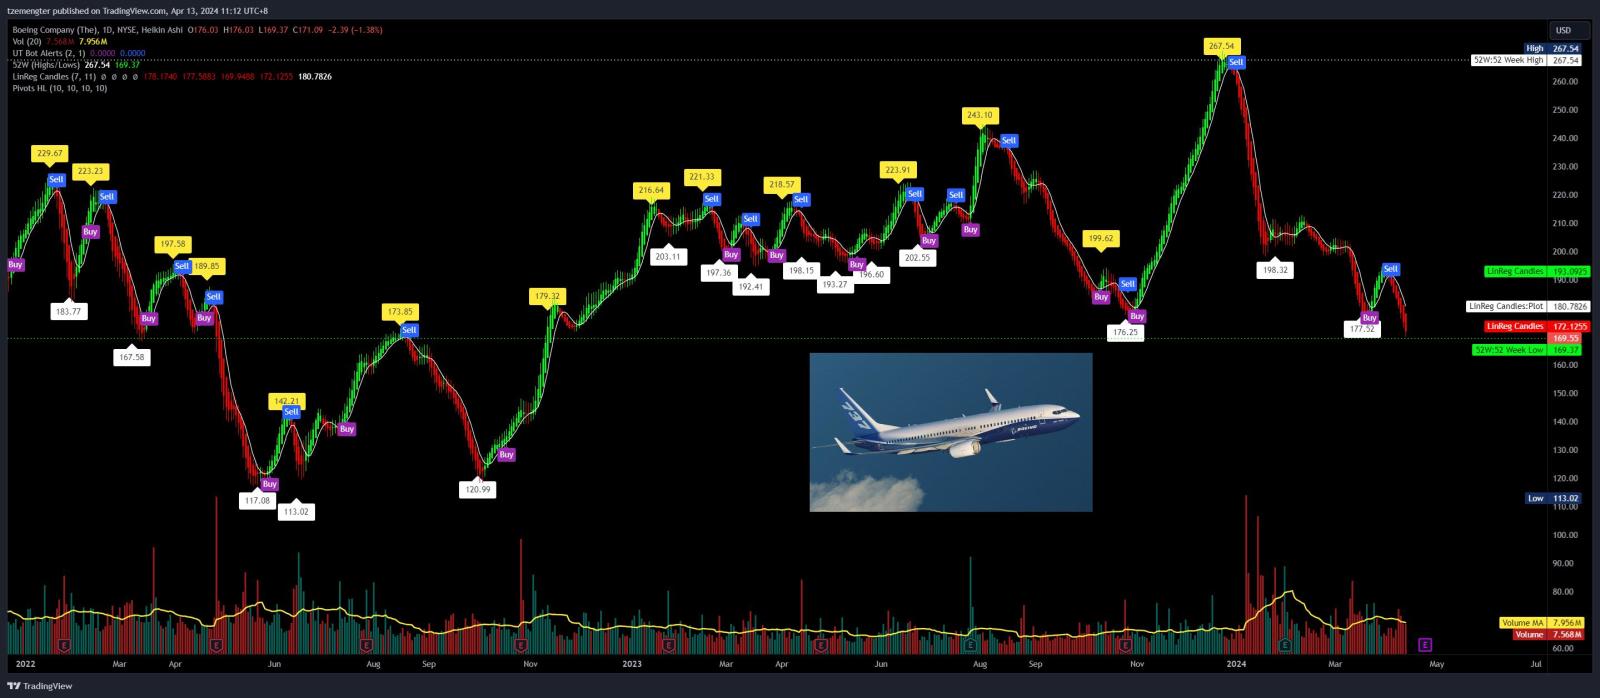 $Boeing (BA.US)$ this is your captain speaking, we are landing..